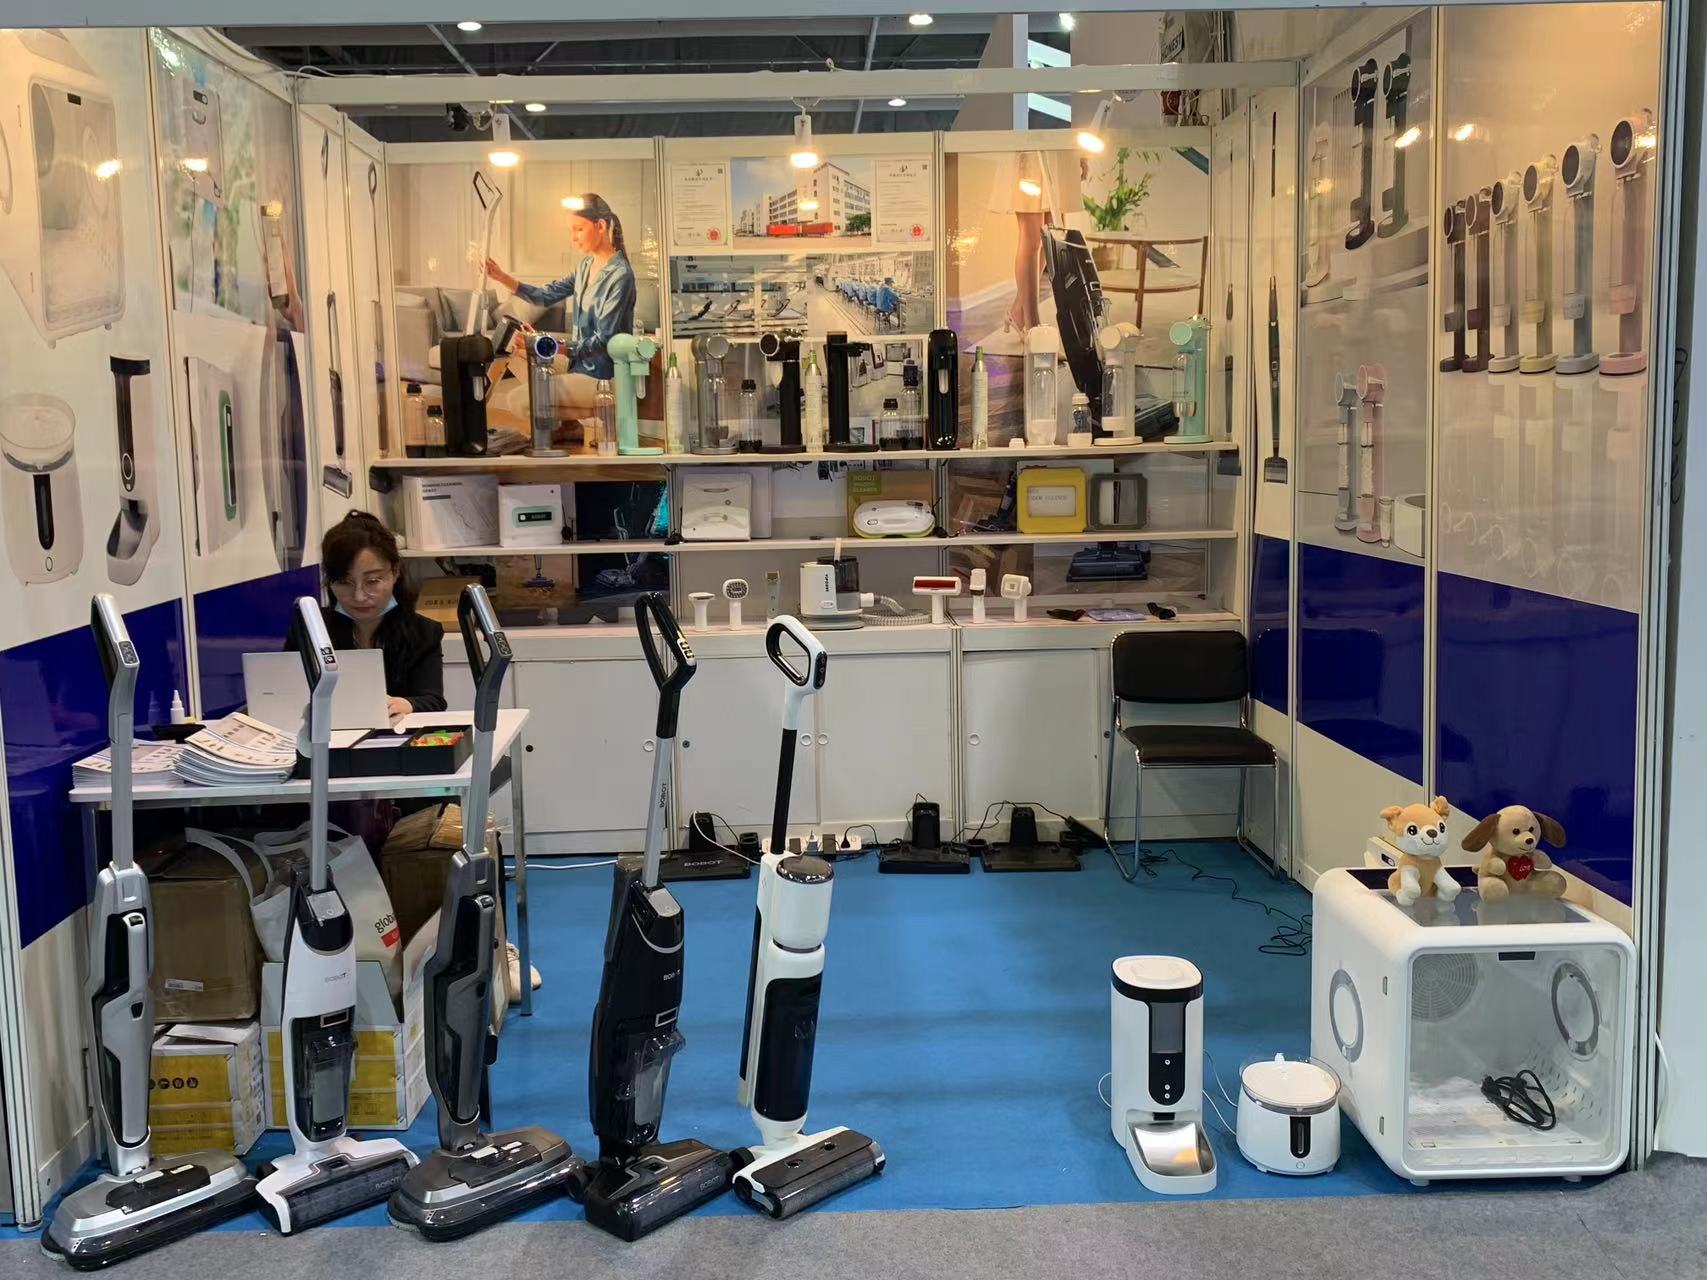 Bengbu MiFan Technology Co., Ltd Invites Visitors to Explore Innovative Cleaning Tools at Global Sources Exhibitions in Hong Kong - Notícias da empresa - 1